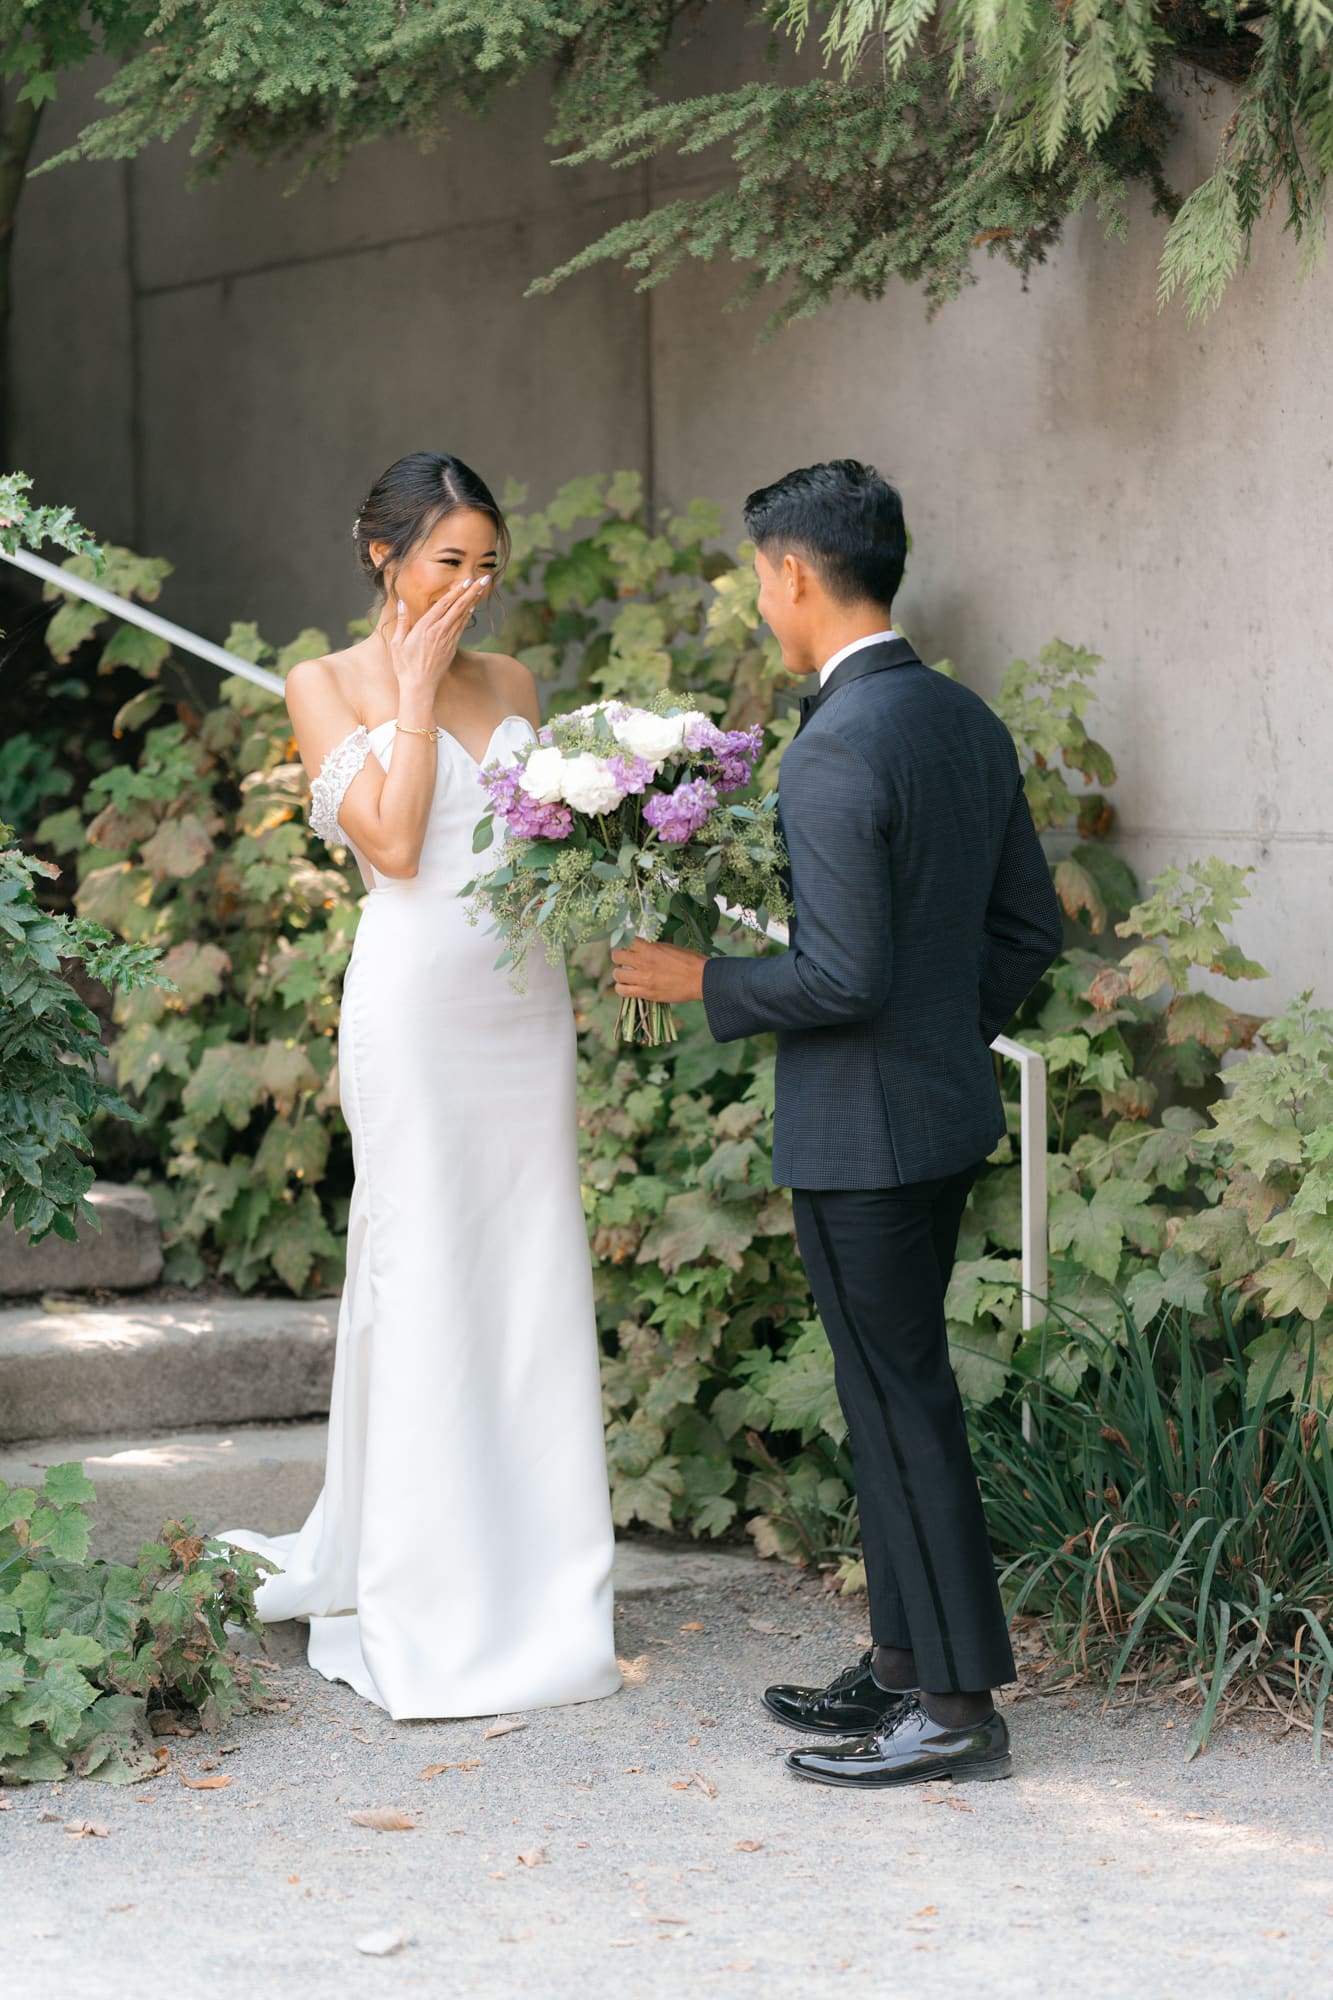 A bride wiping her tears when doing the first look with the groom at Olympic Sculpture Park in Seattle.